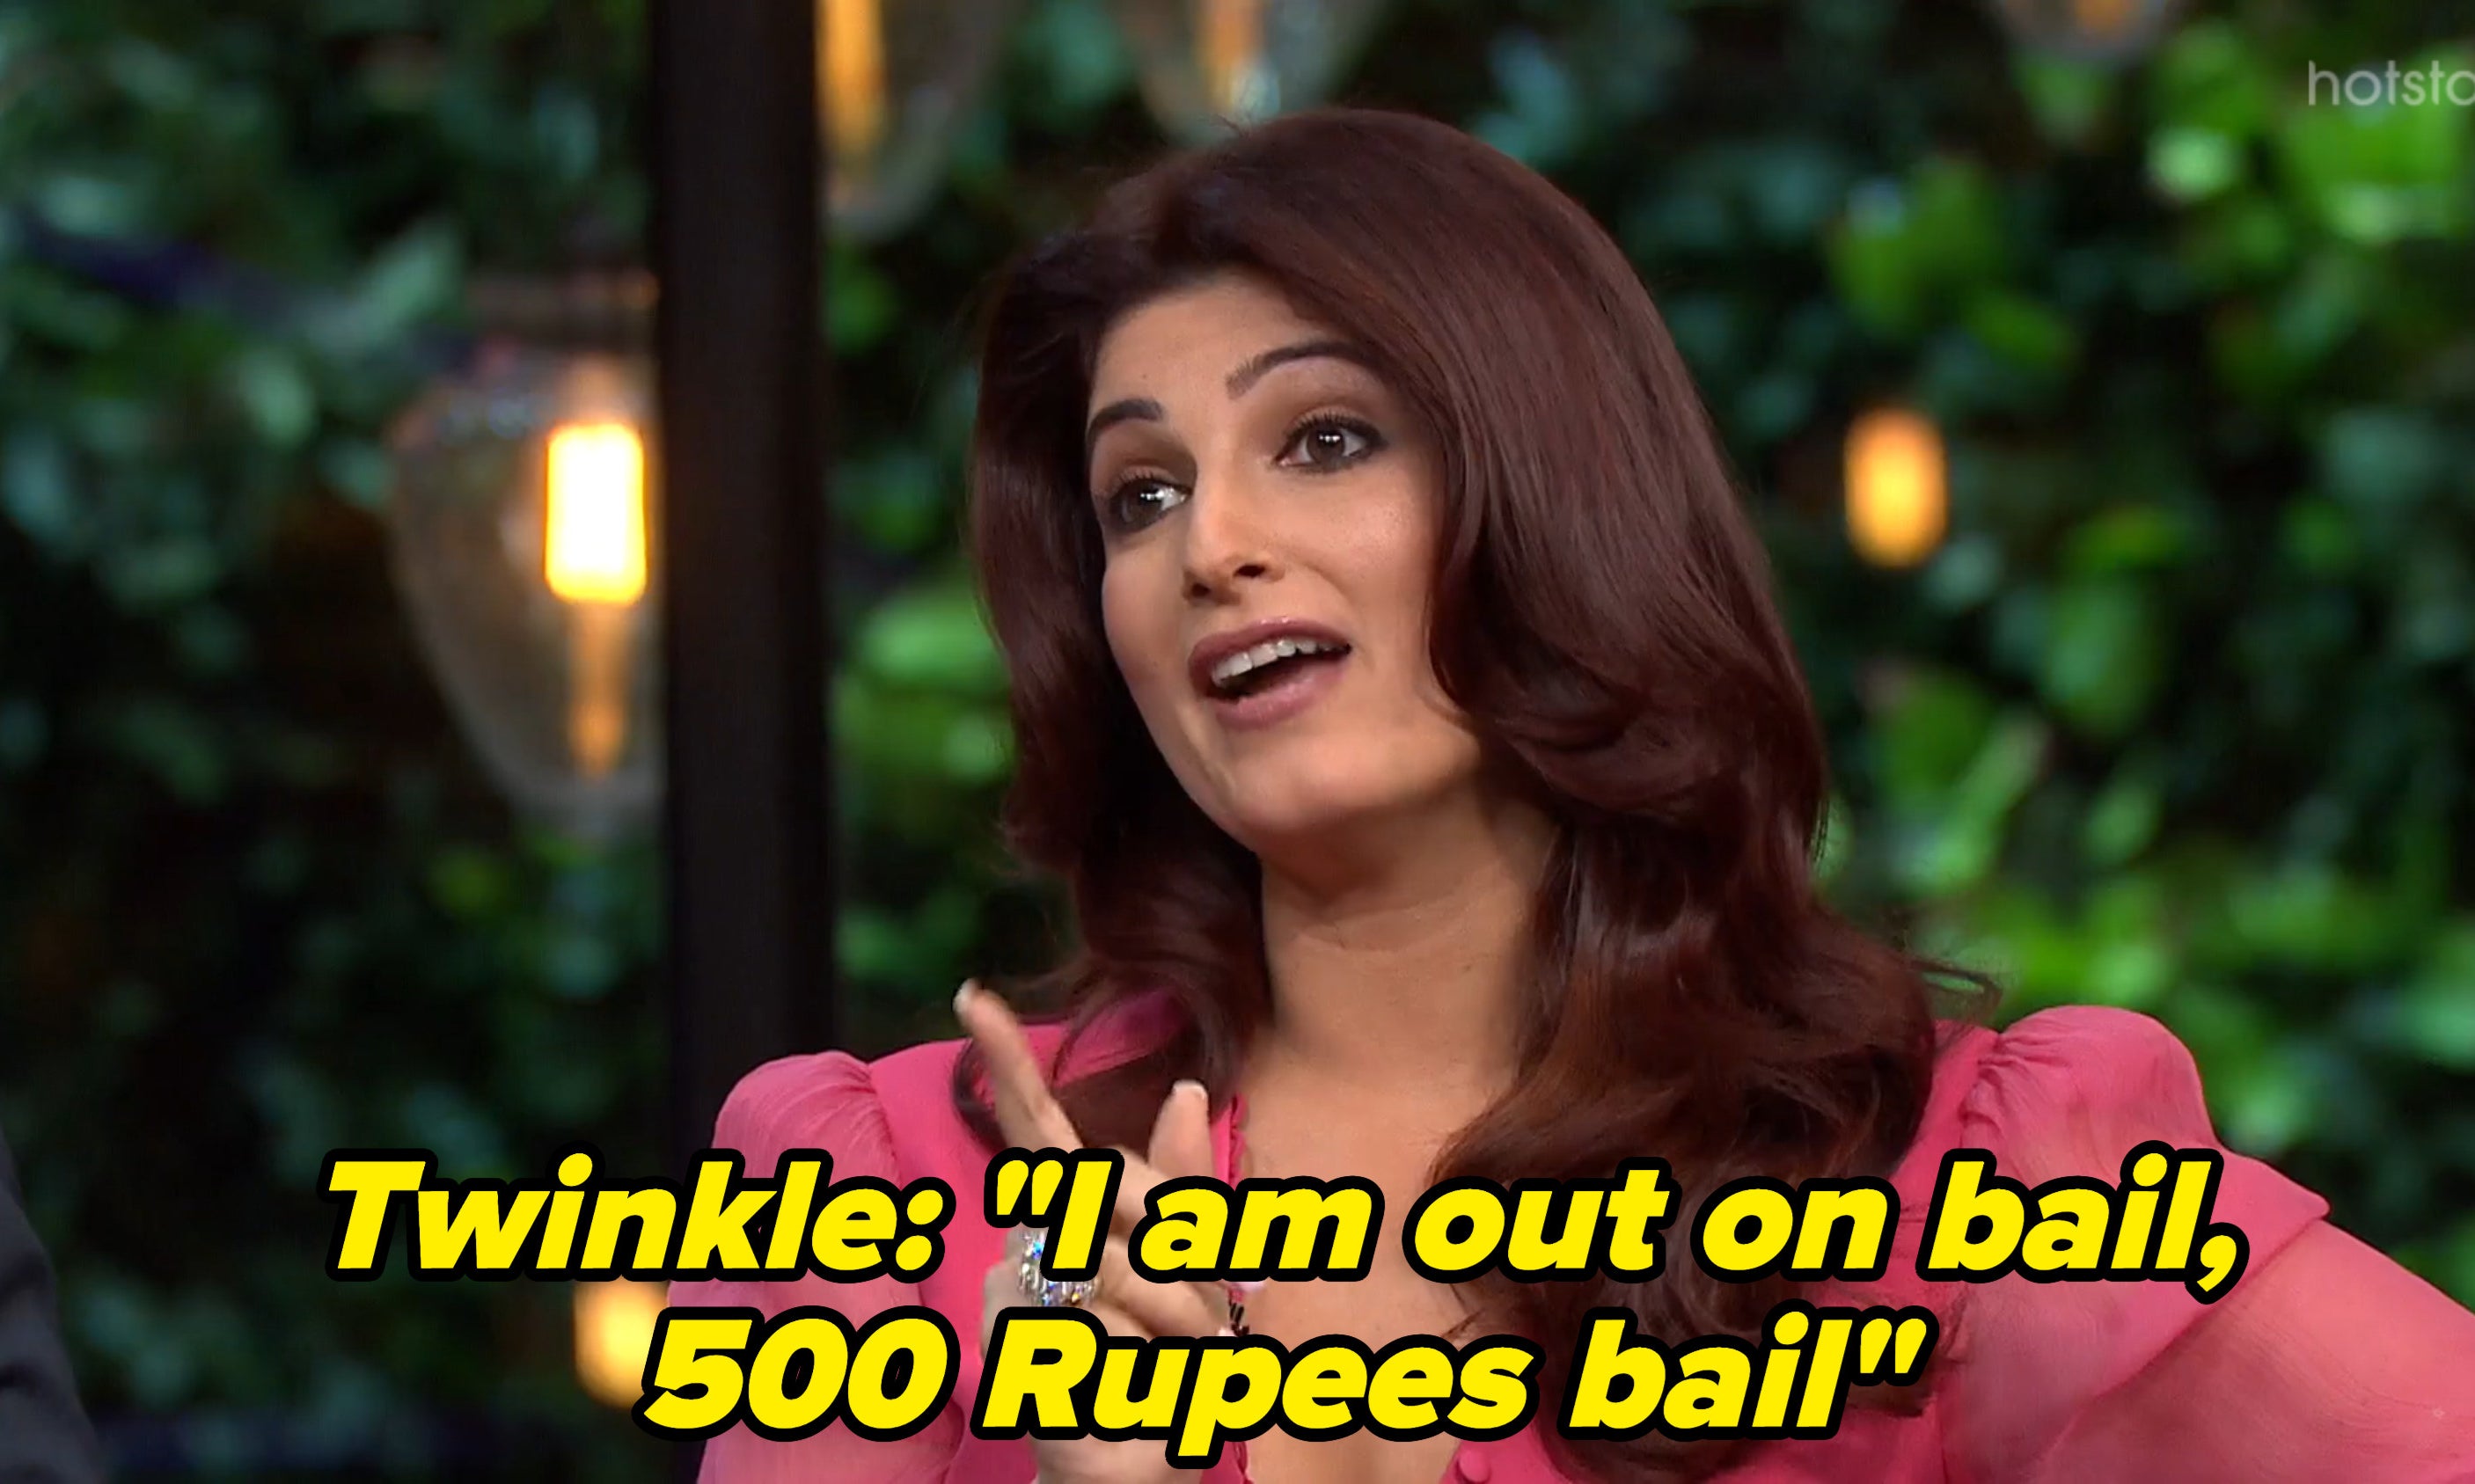 Twinkle Khanna speaking with her finger pointed up